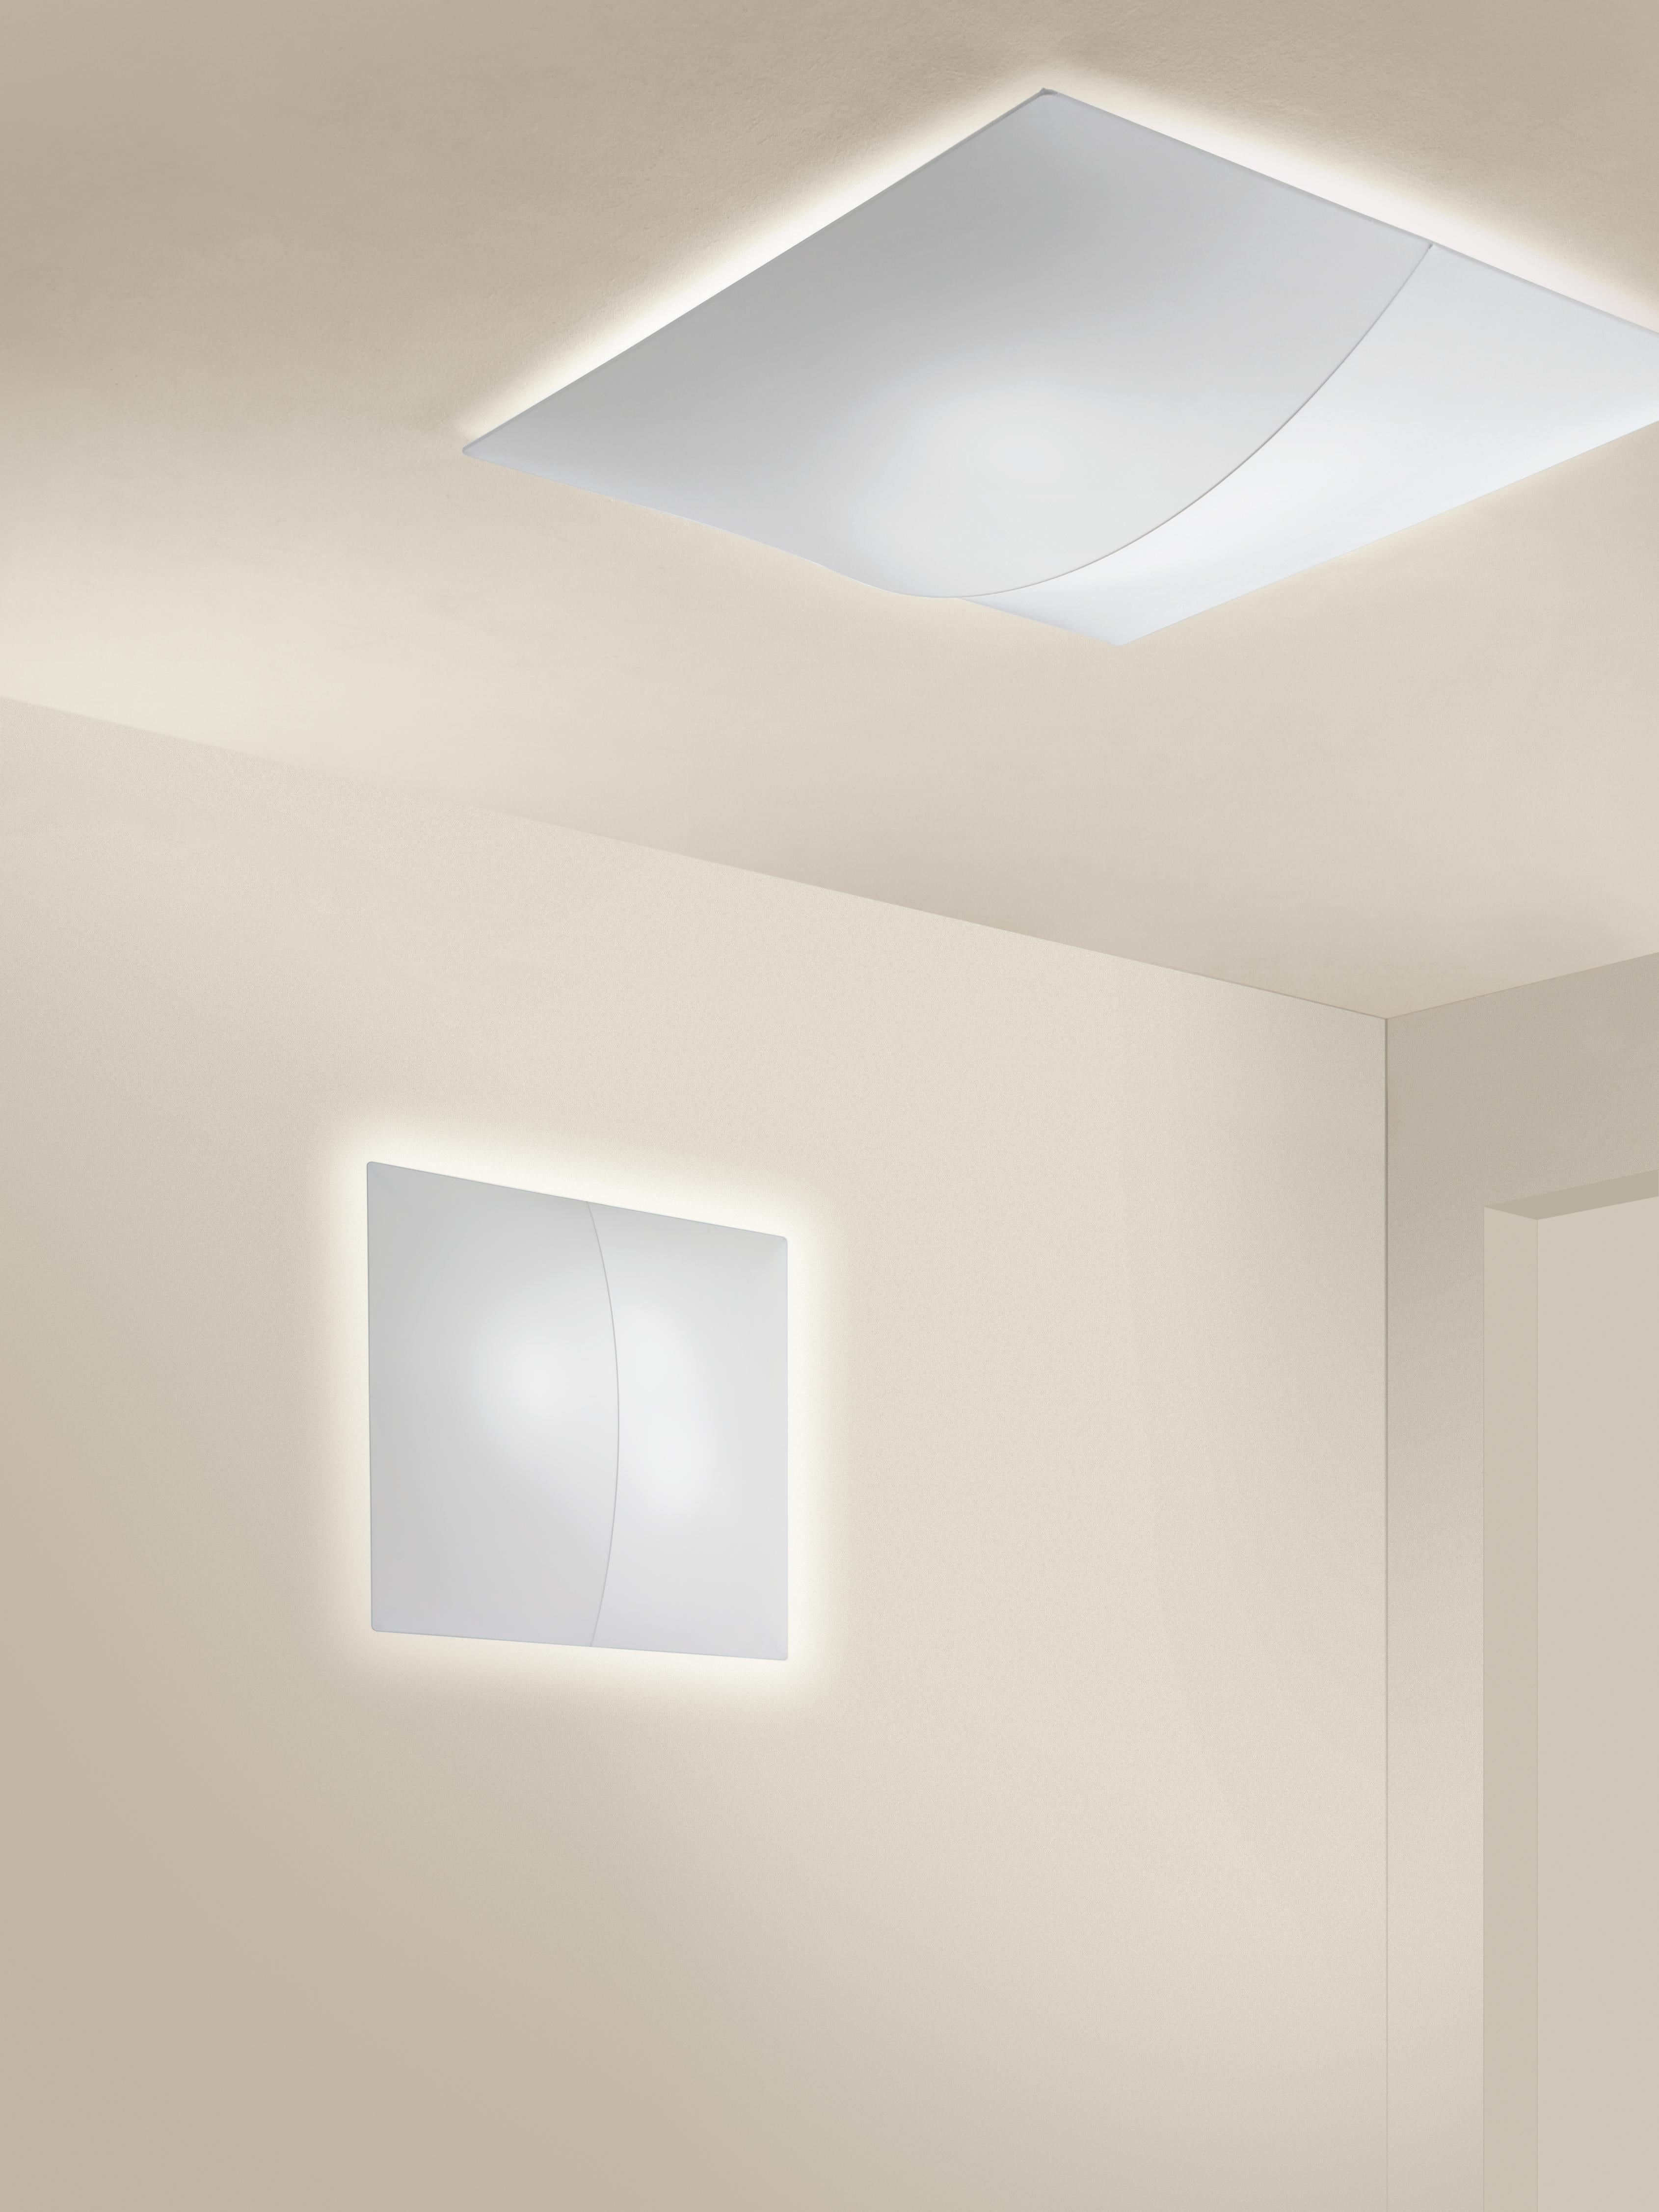 Axolight Medium 60 Nelly Wall Lamp in White by Manuel & Vanessa Vivian

Geometric simplicity and a discreet game of light and shade. Nelly is the purity of a white canvas interrupted by a linear trace that gently crosses it, emphasizing reflections